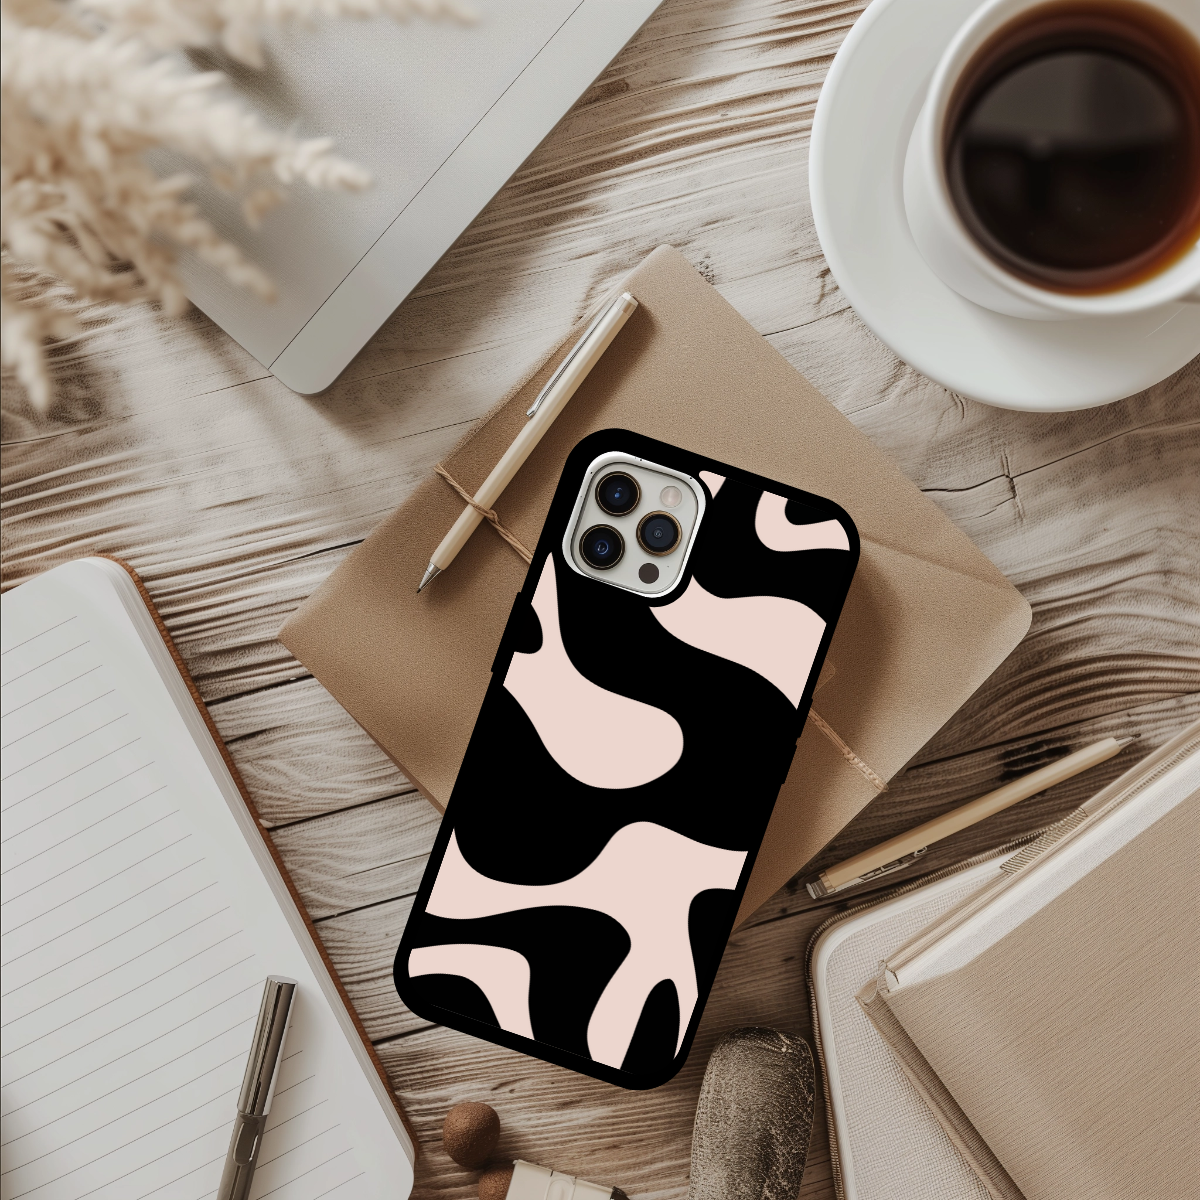 Elegant beige and Black Phone Case perfect gift for her cute phone case the best gift for teens who love trendy phone cases and  iPhone case